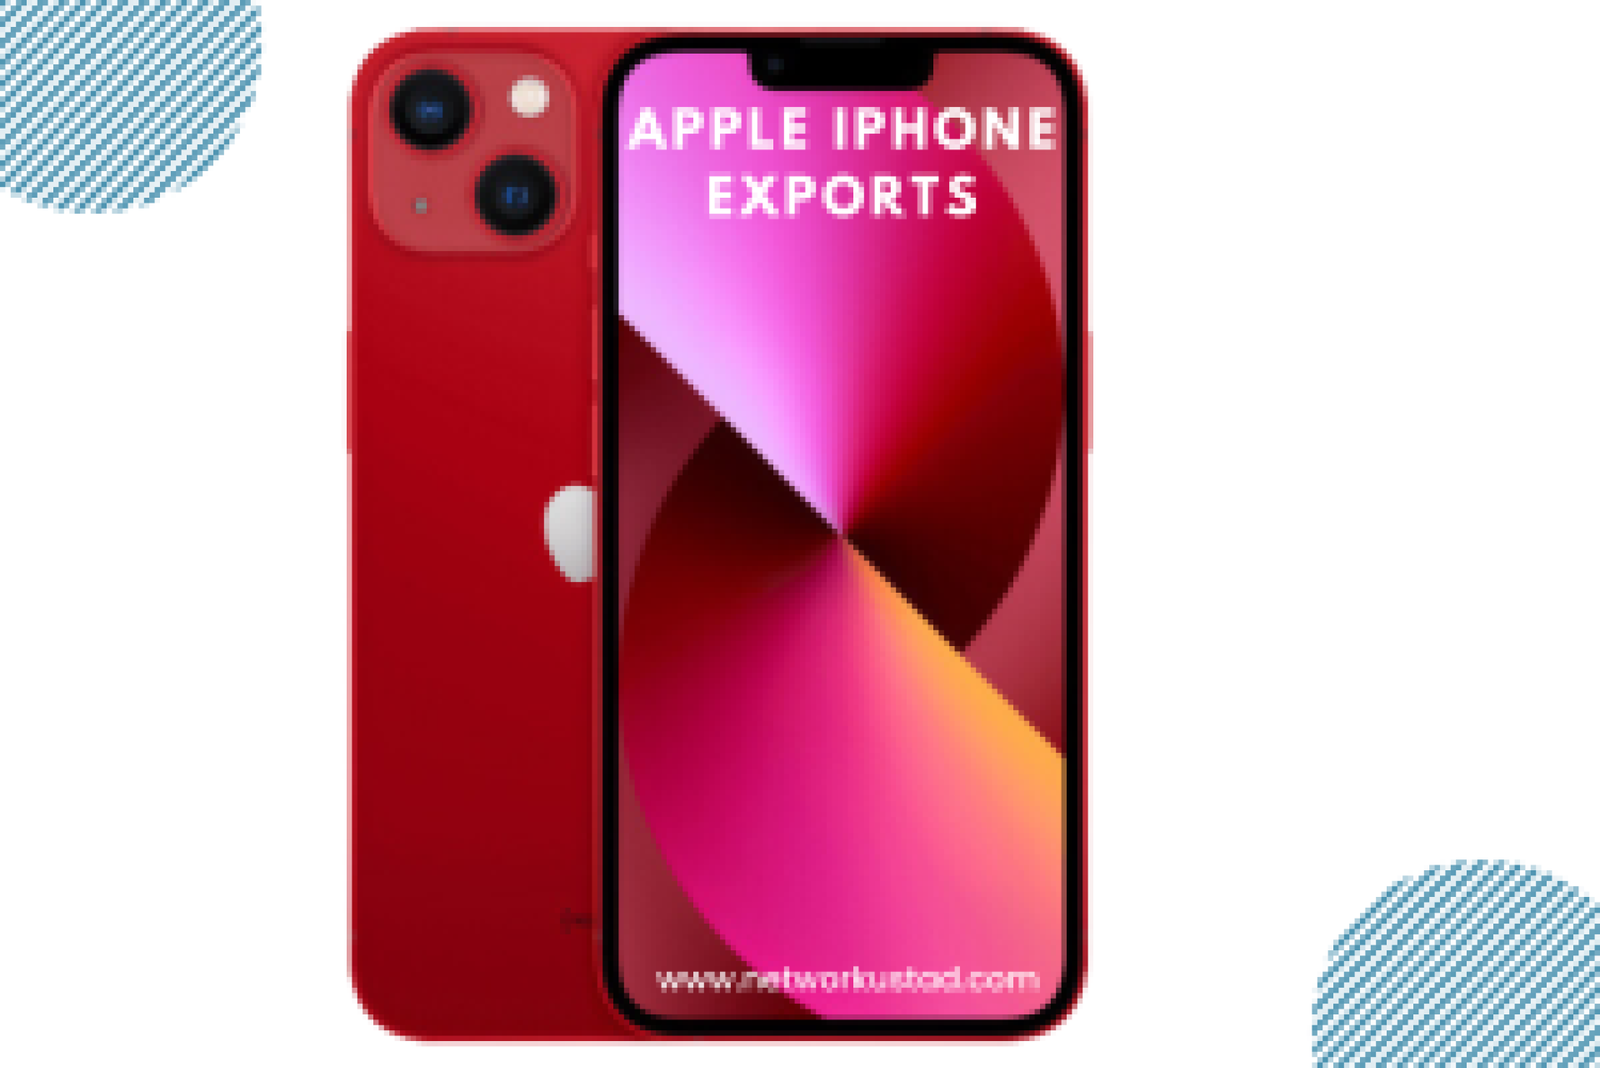 Apple iPhone Exports